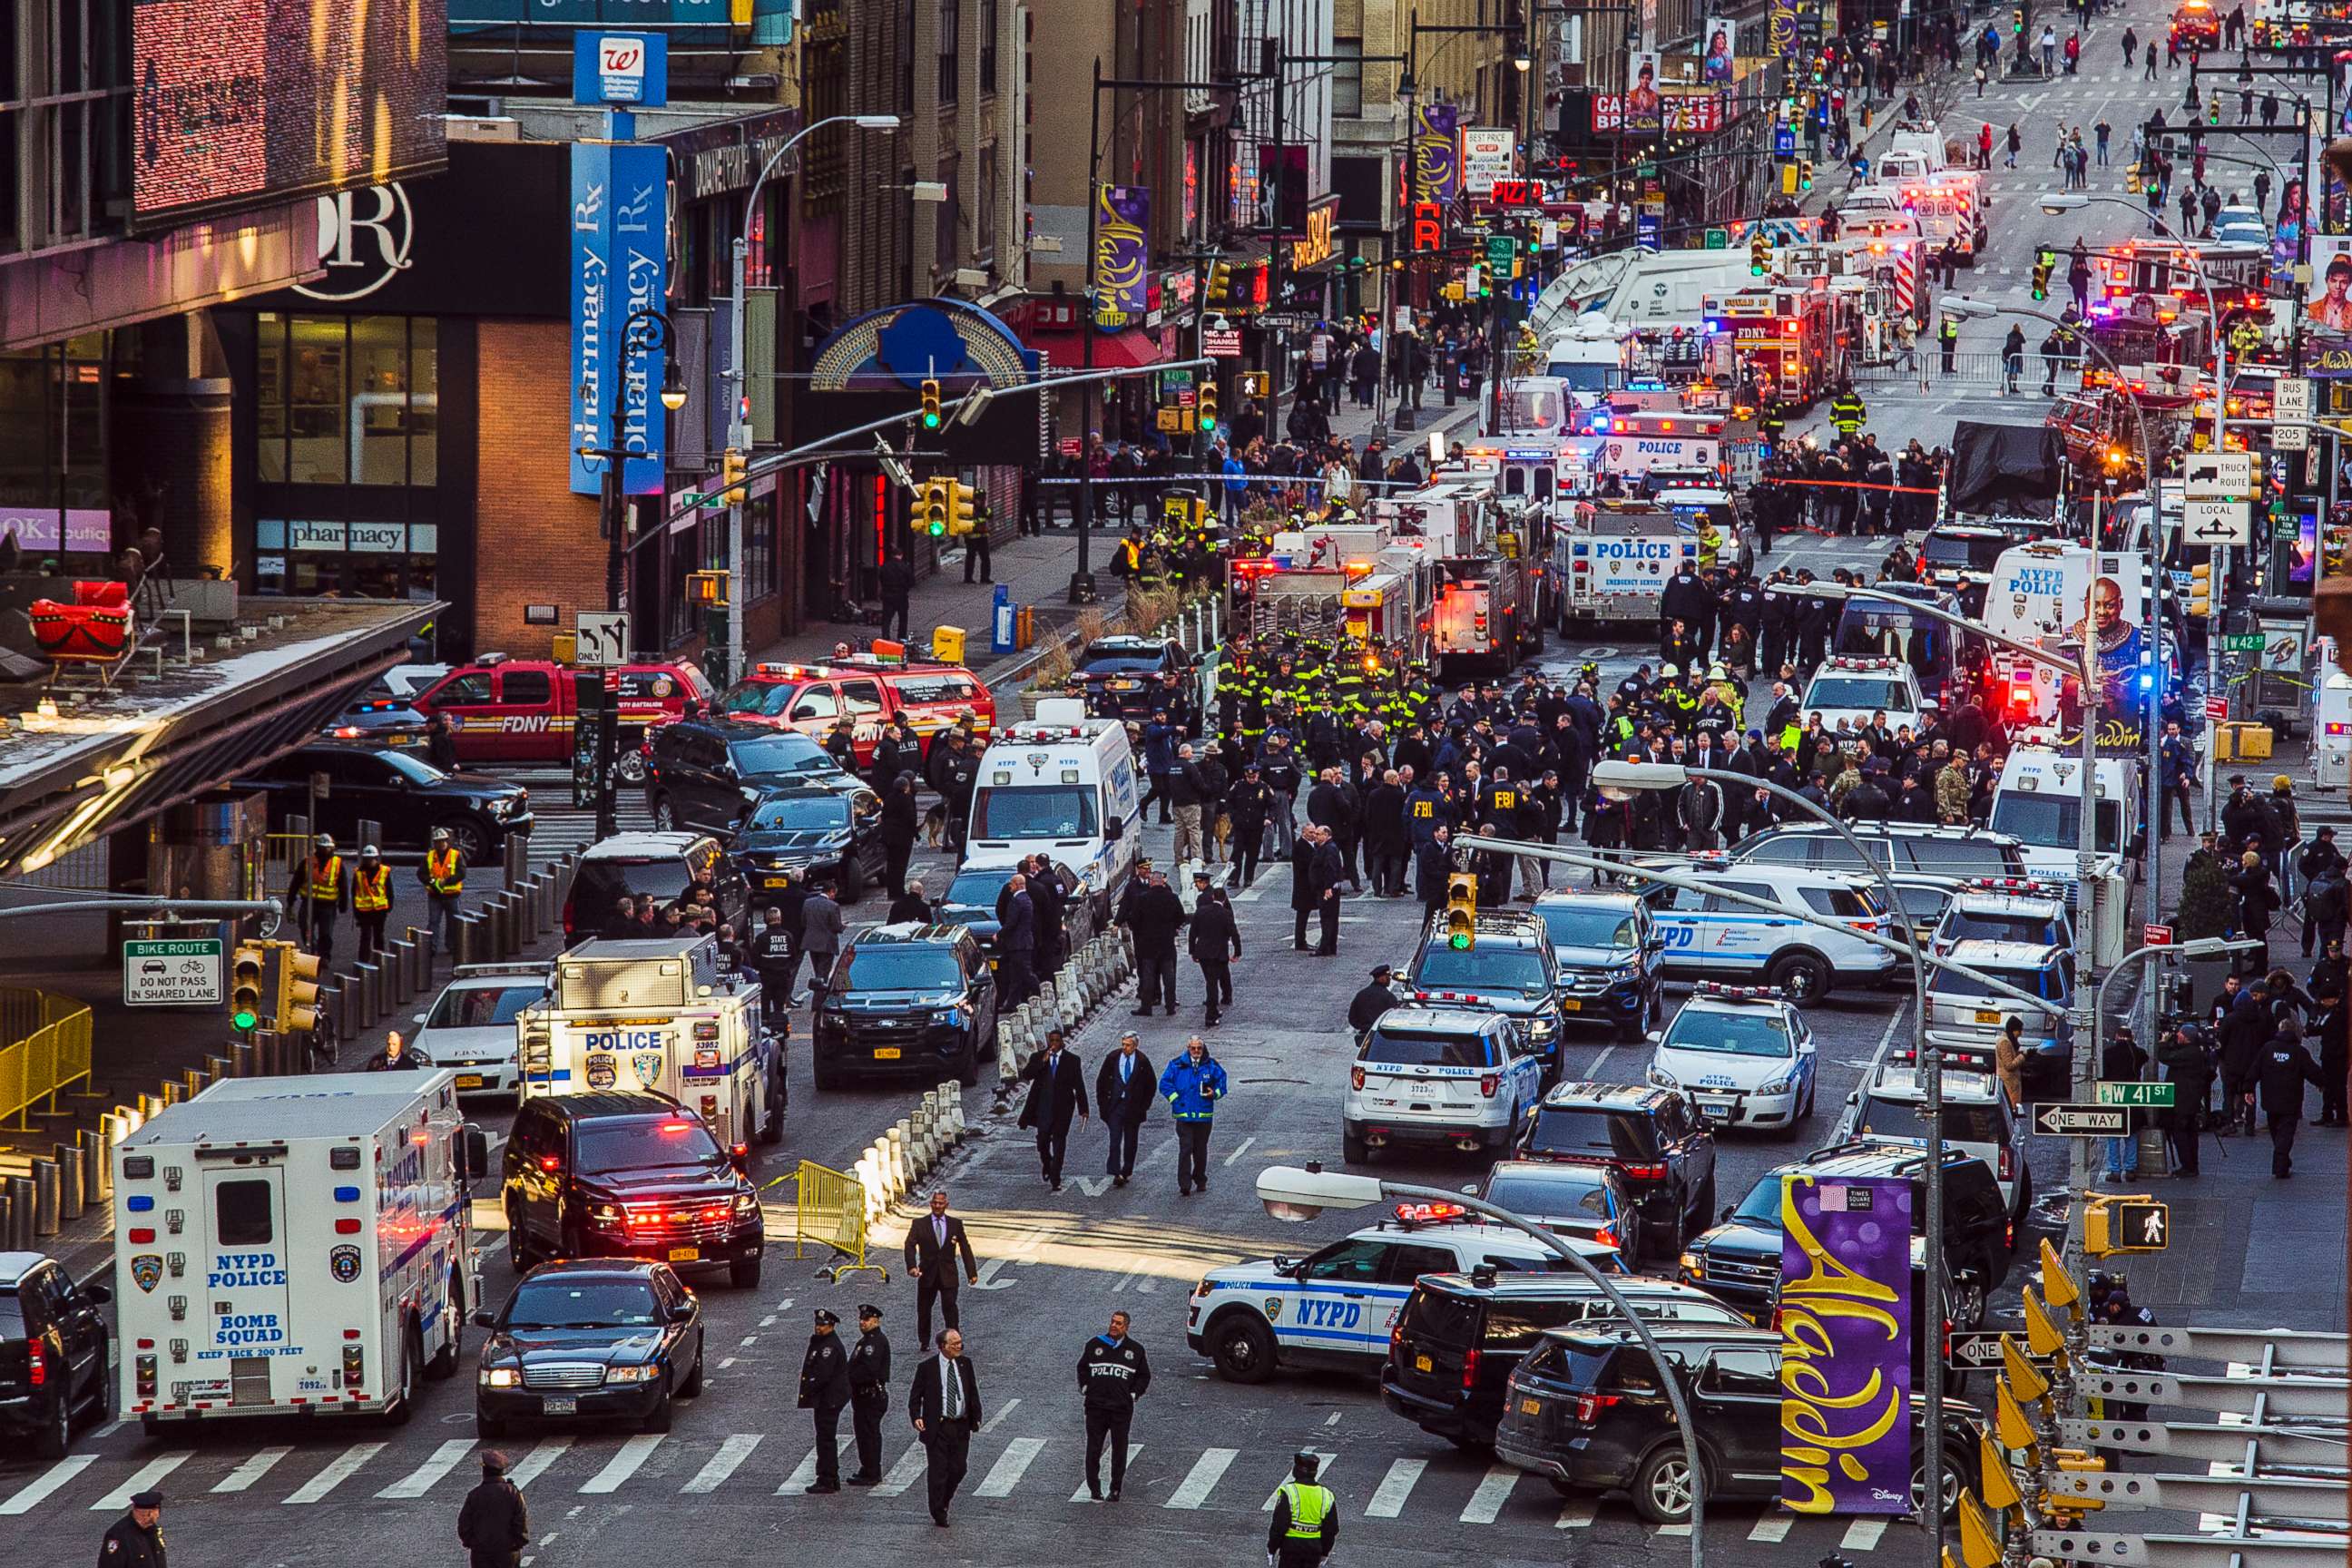 PHOTO: Law enforcement officials work following an explosion near New York's Times Square on Dec. 11, 2017.